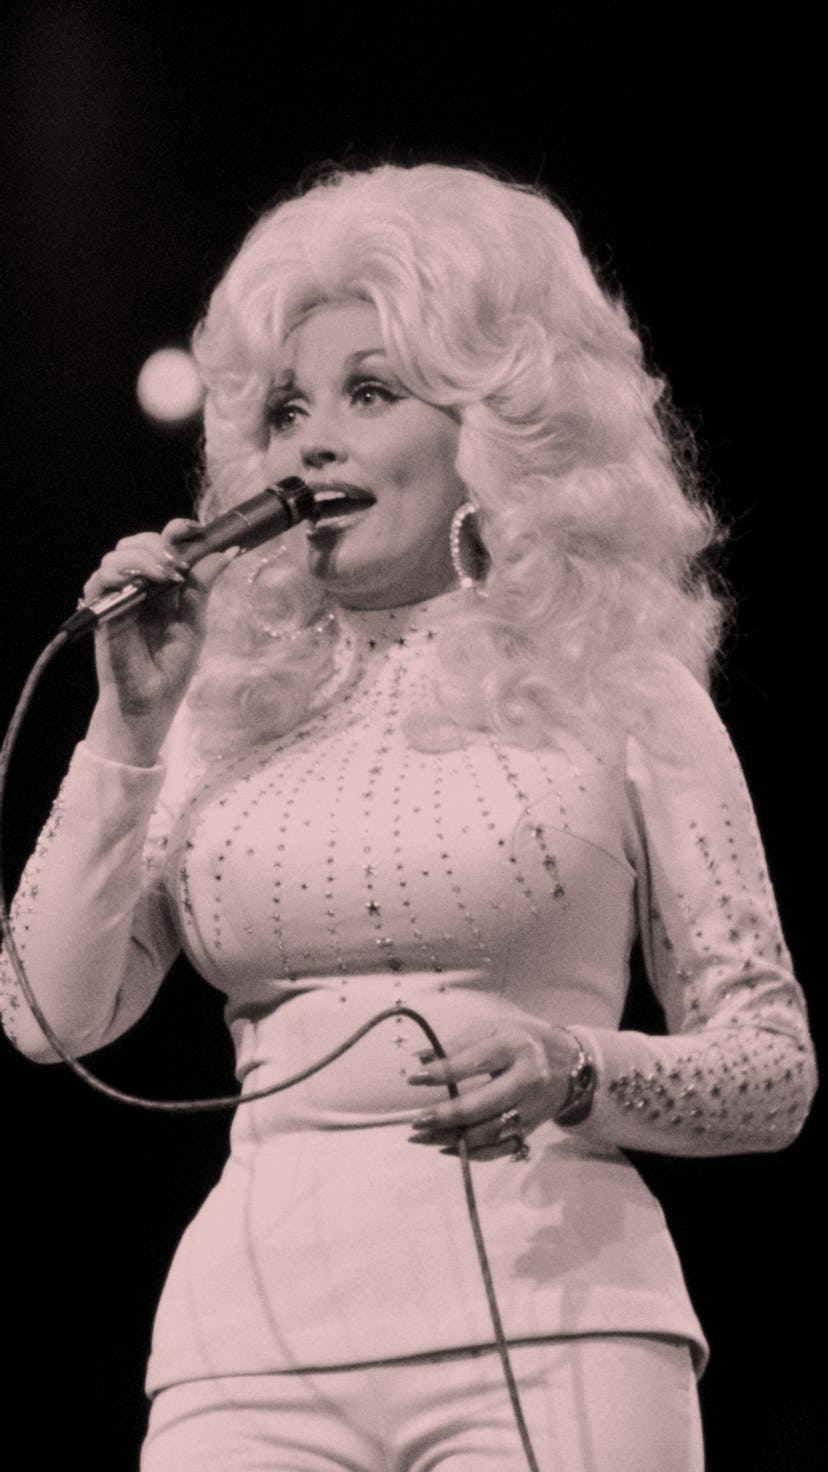 Dolly Parton on stage with big blonde hair and pink matching outfit in 1975.